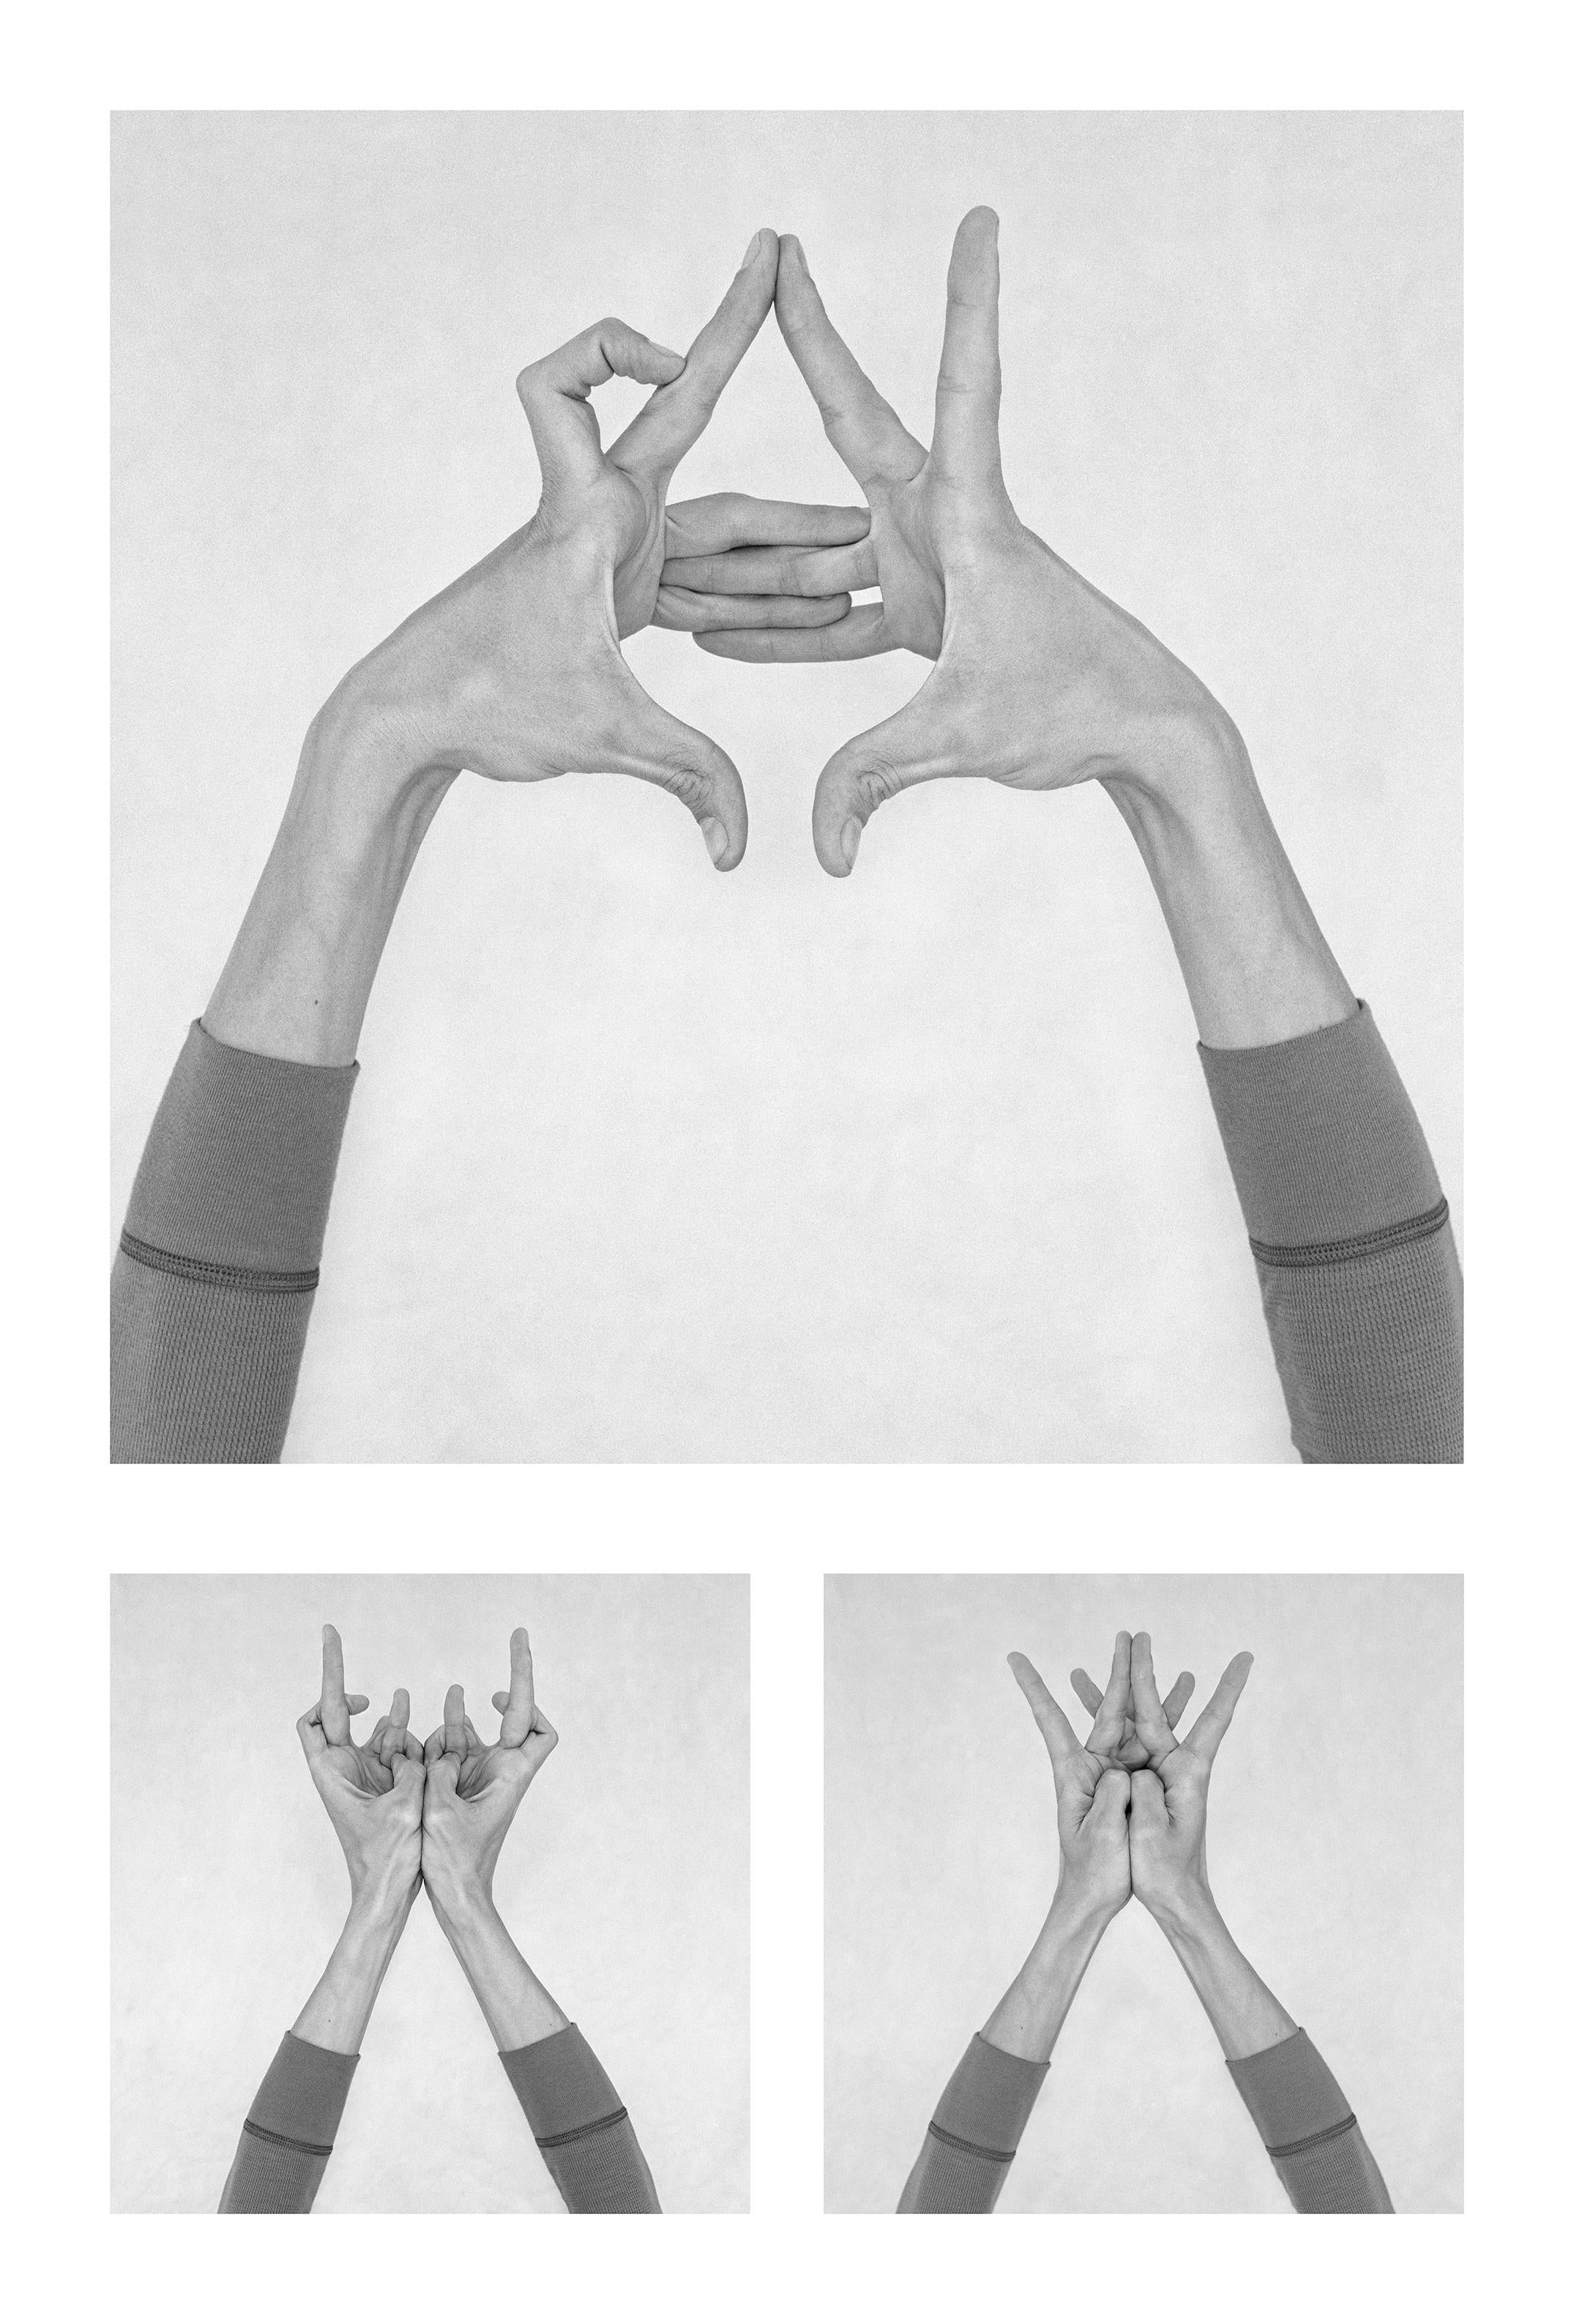 Untitled XII, XXXVII, and Untitled XXVI. Hands. From the Series Chiromorphose